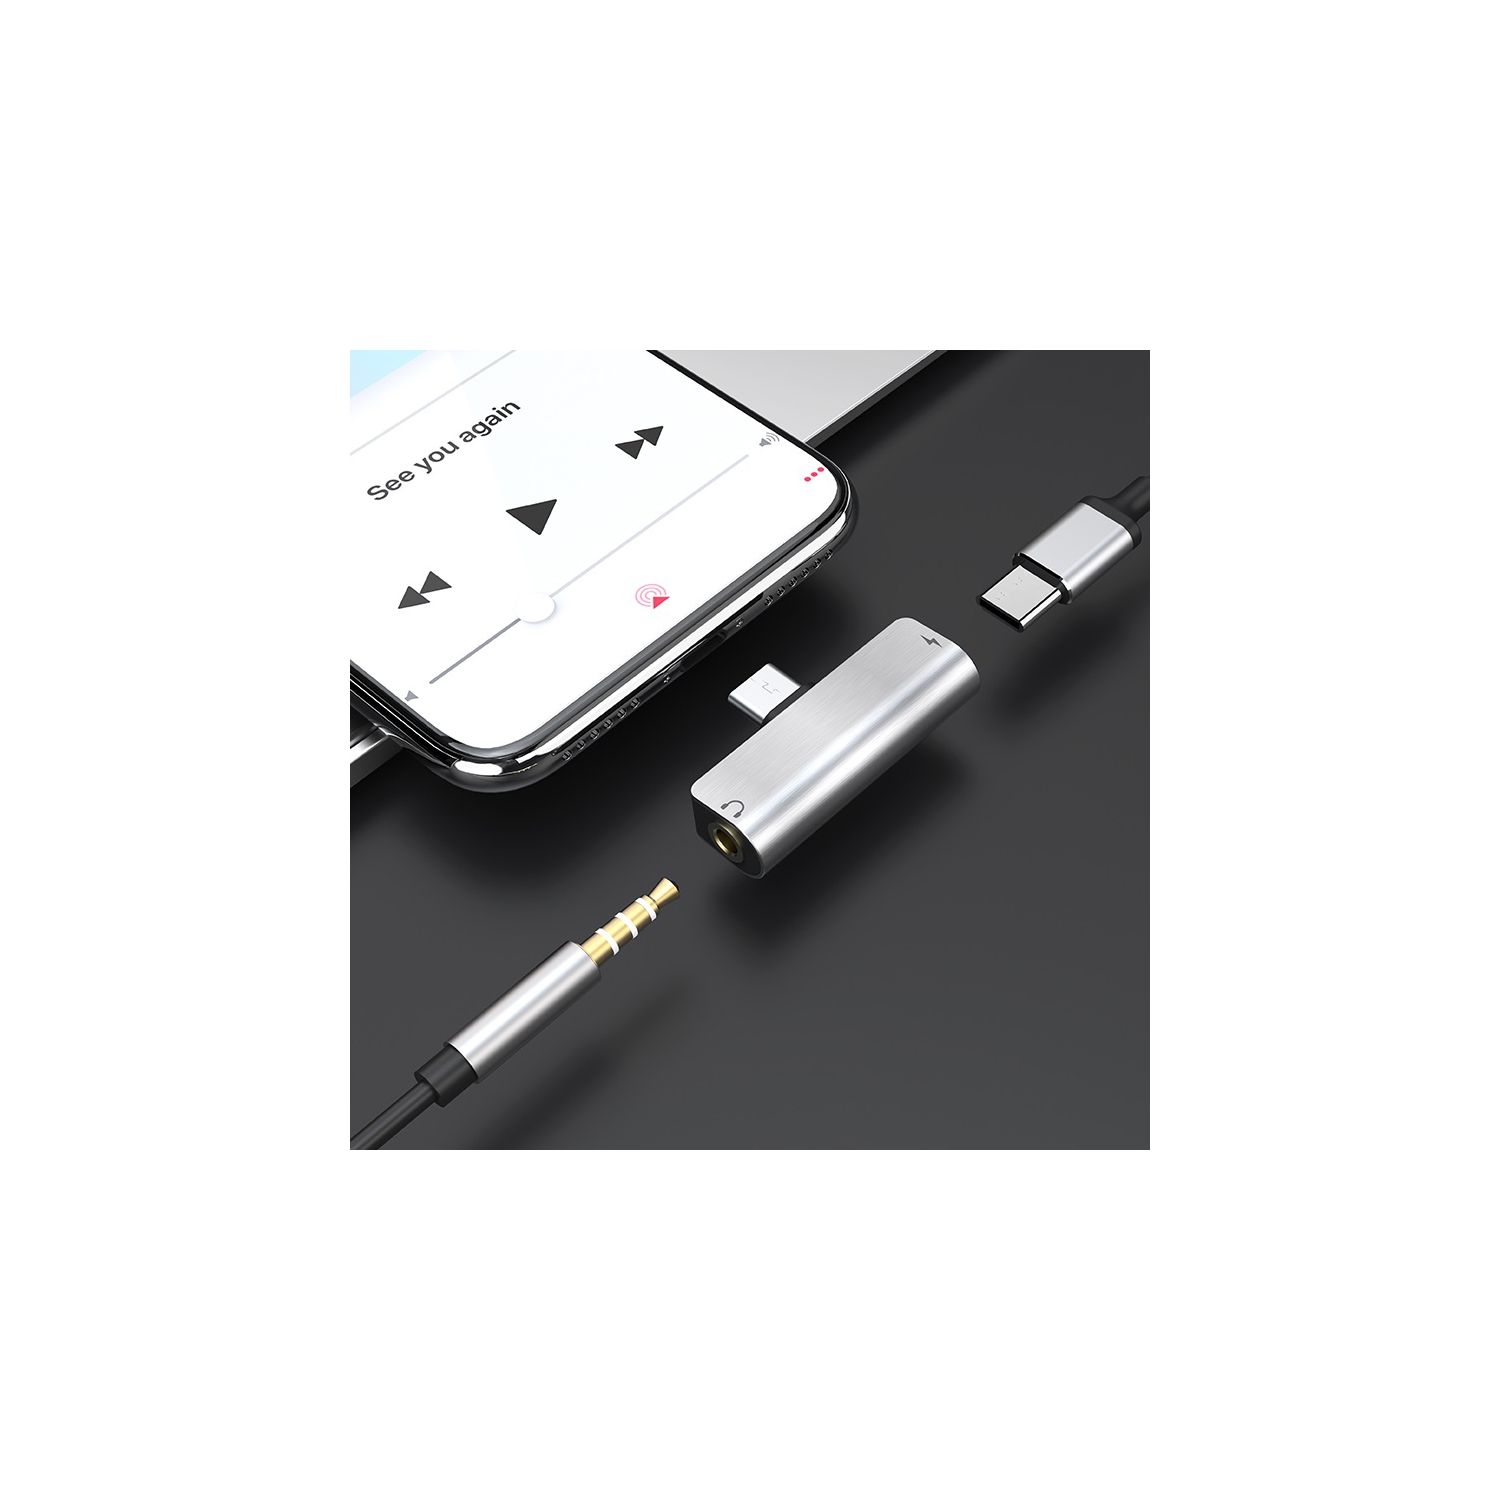 【CSmart】 2 in 1 USB-C to 3.5mm Audio Jack Headphone + Charger Splitter Converter Adapter for Samsung Android Smartphones